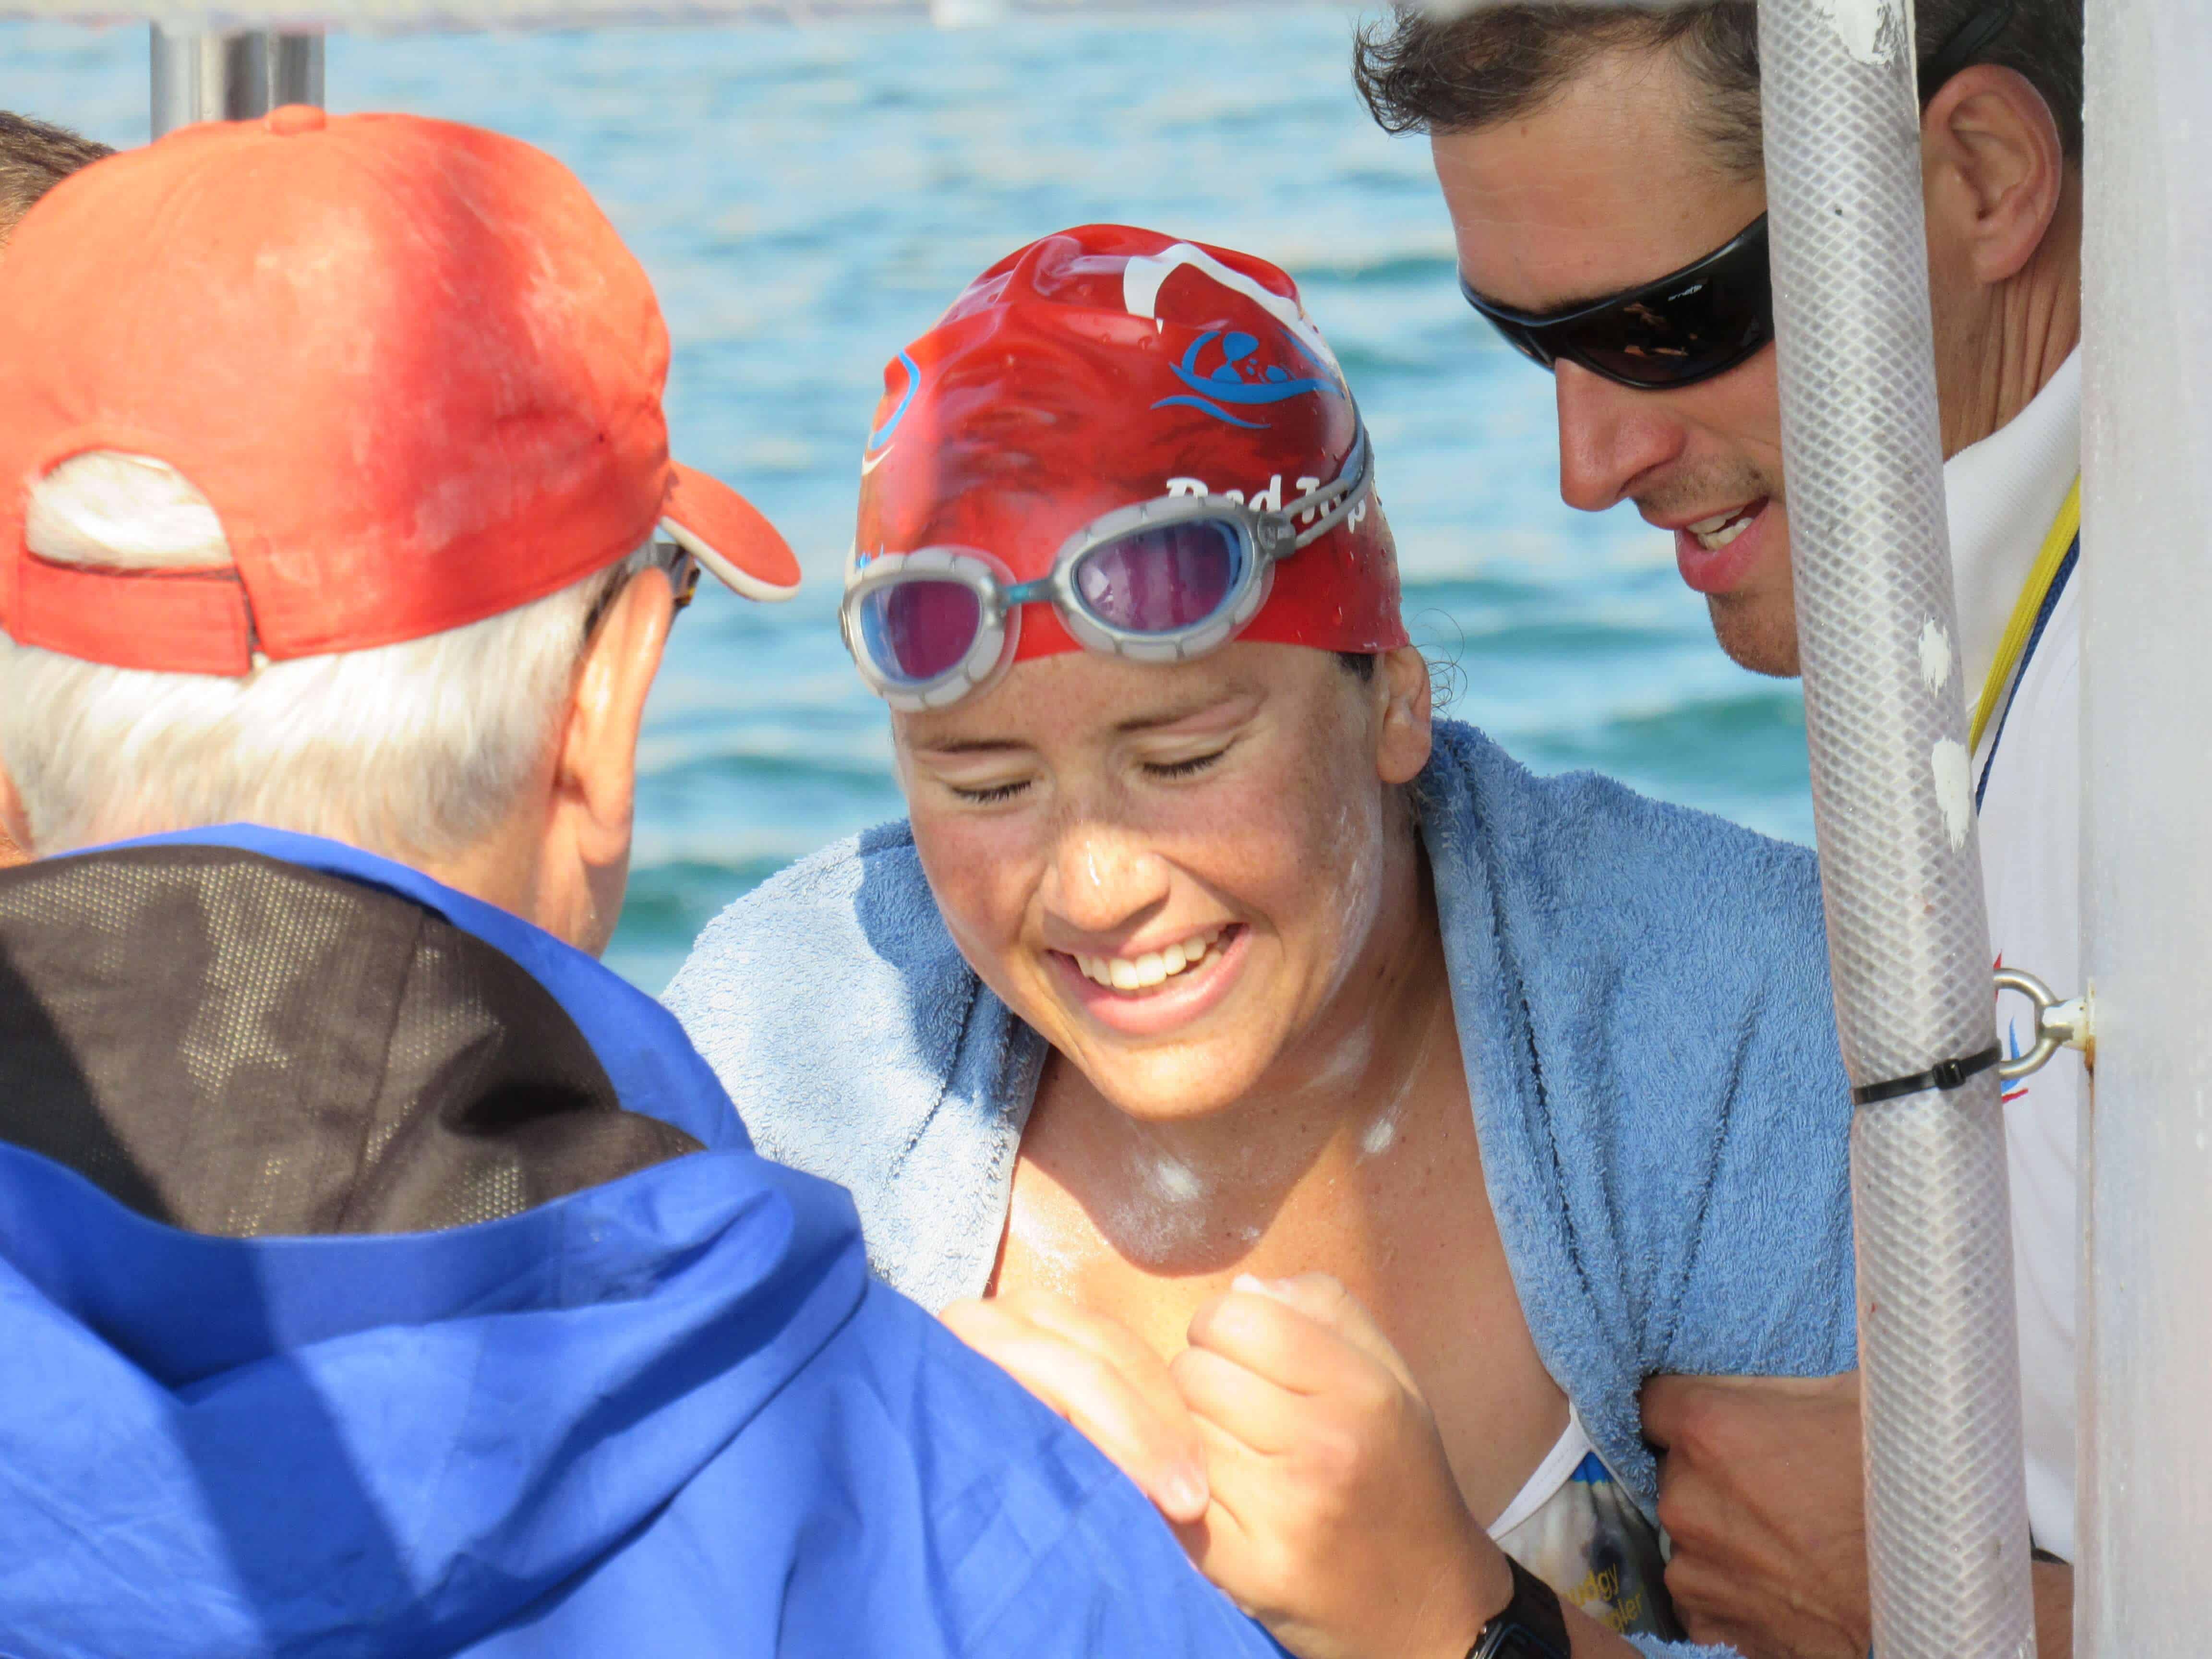 Physio Samantha Poulsen raised over £5,000 with her swim across the Channel